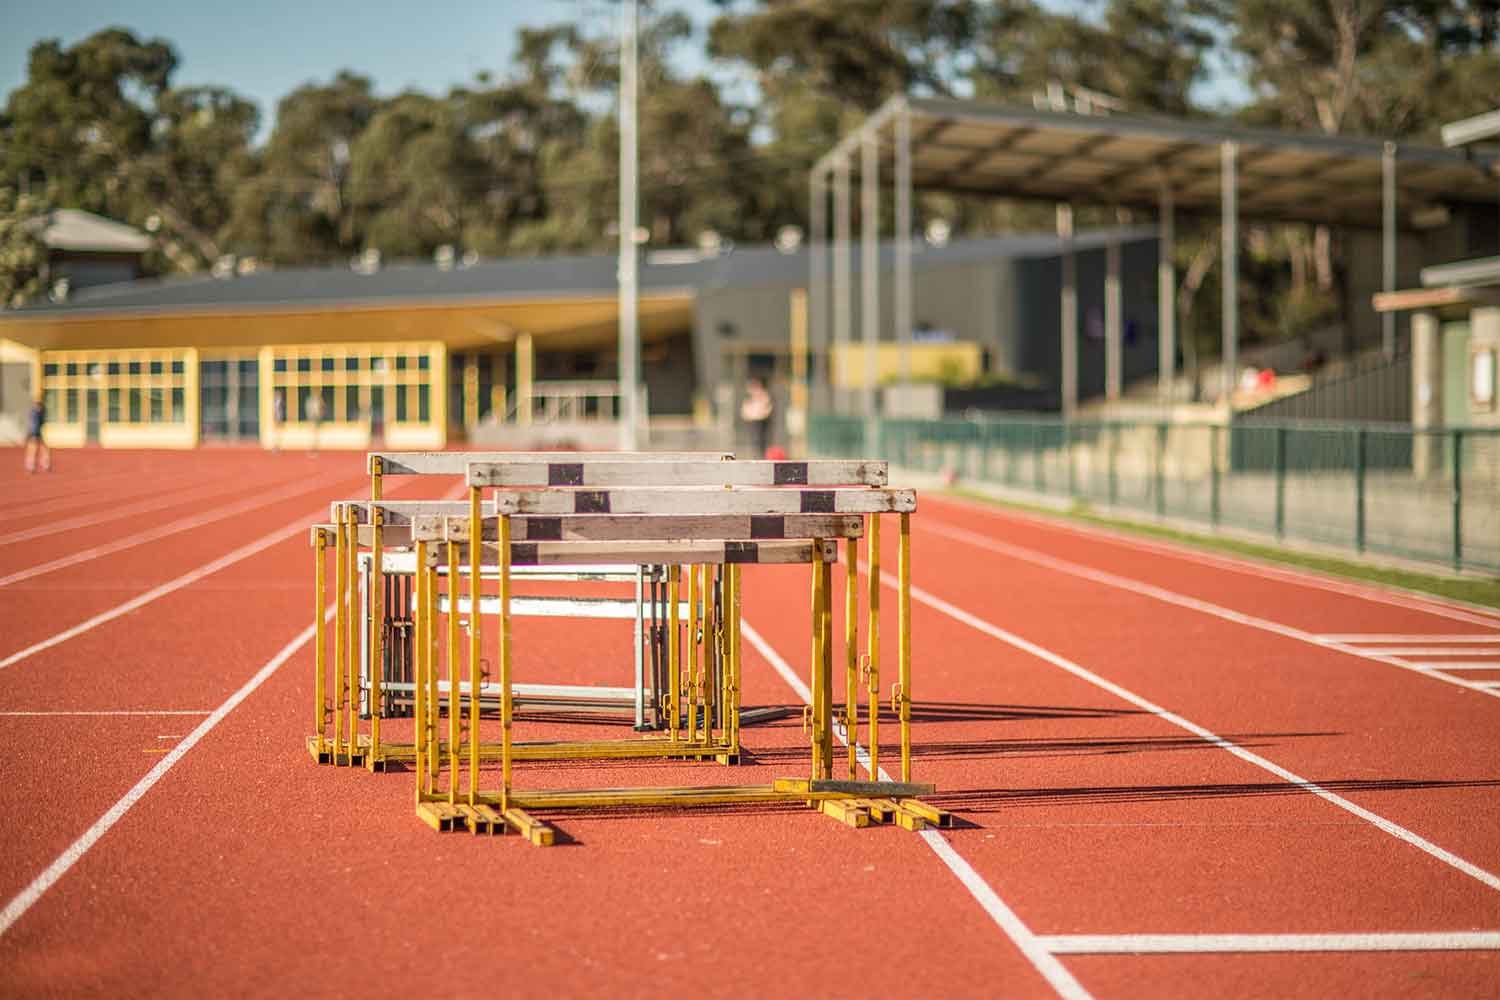 Stack of jumping bars in the middle of red outdoor athletic running tracks